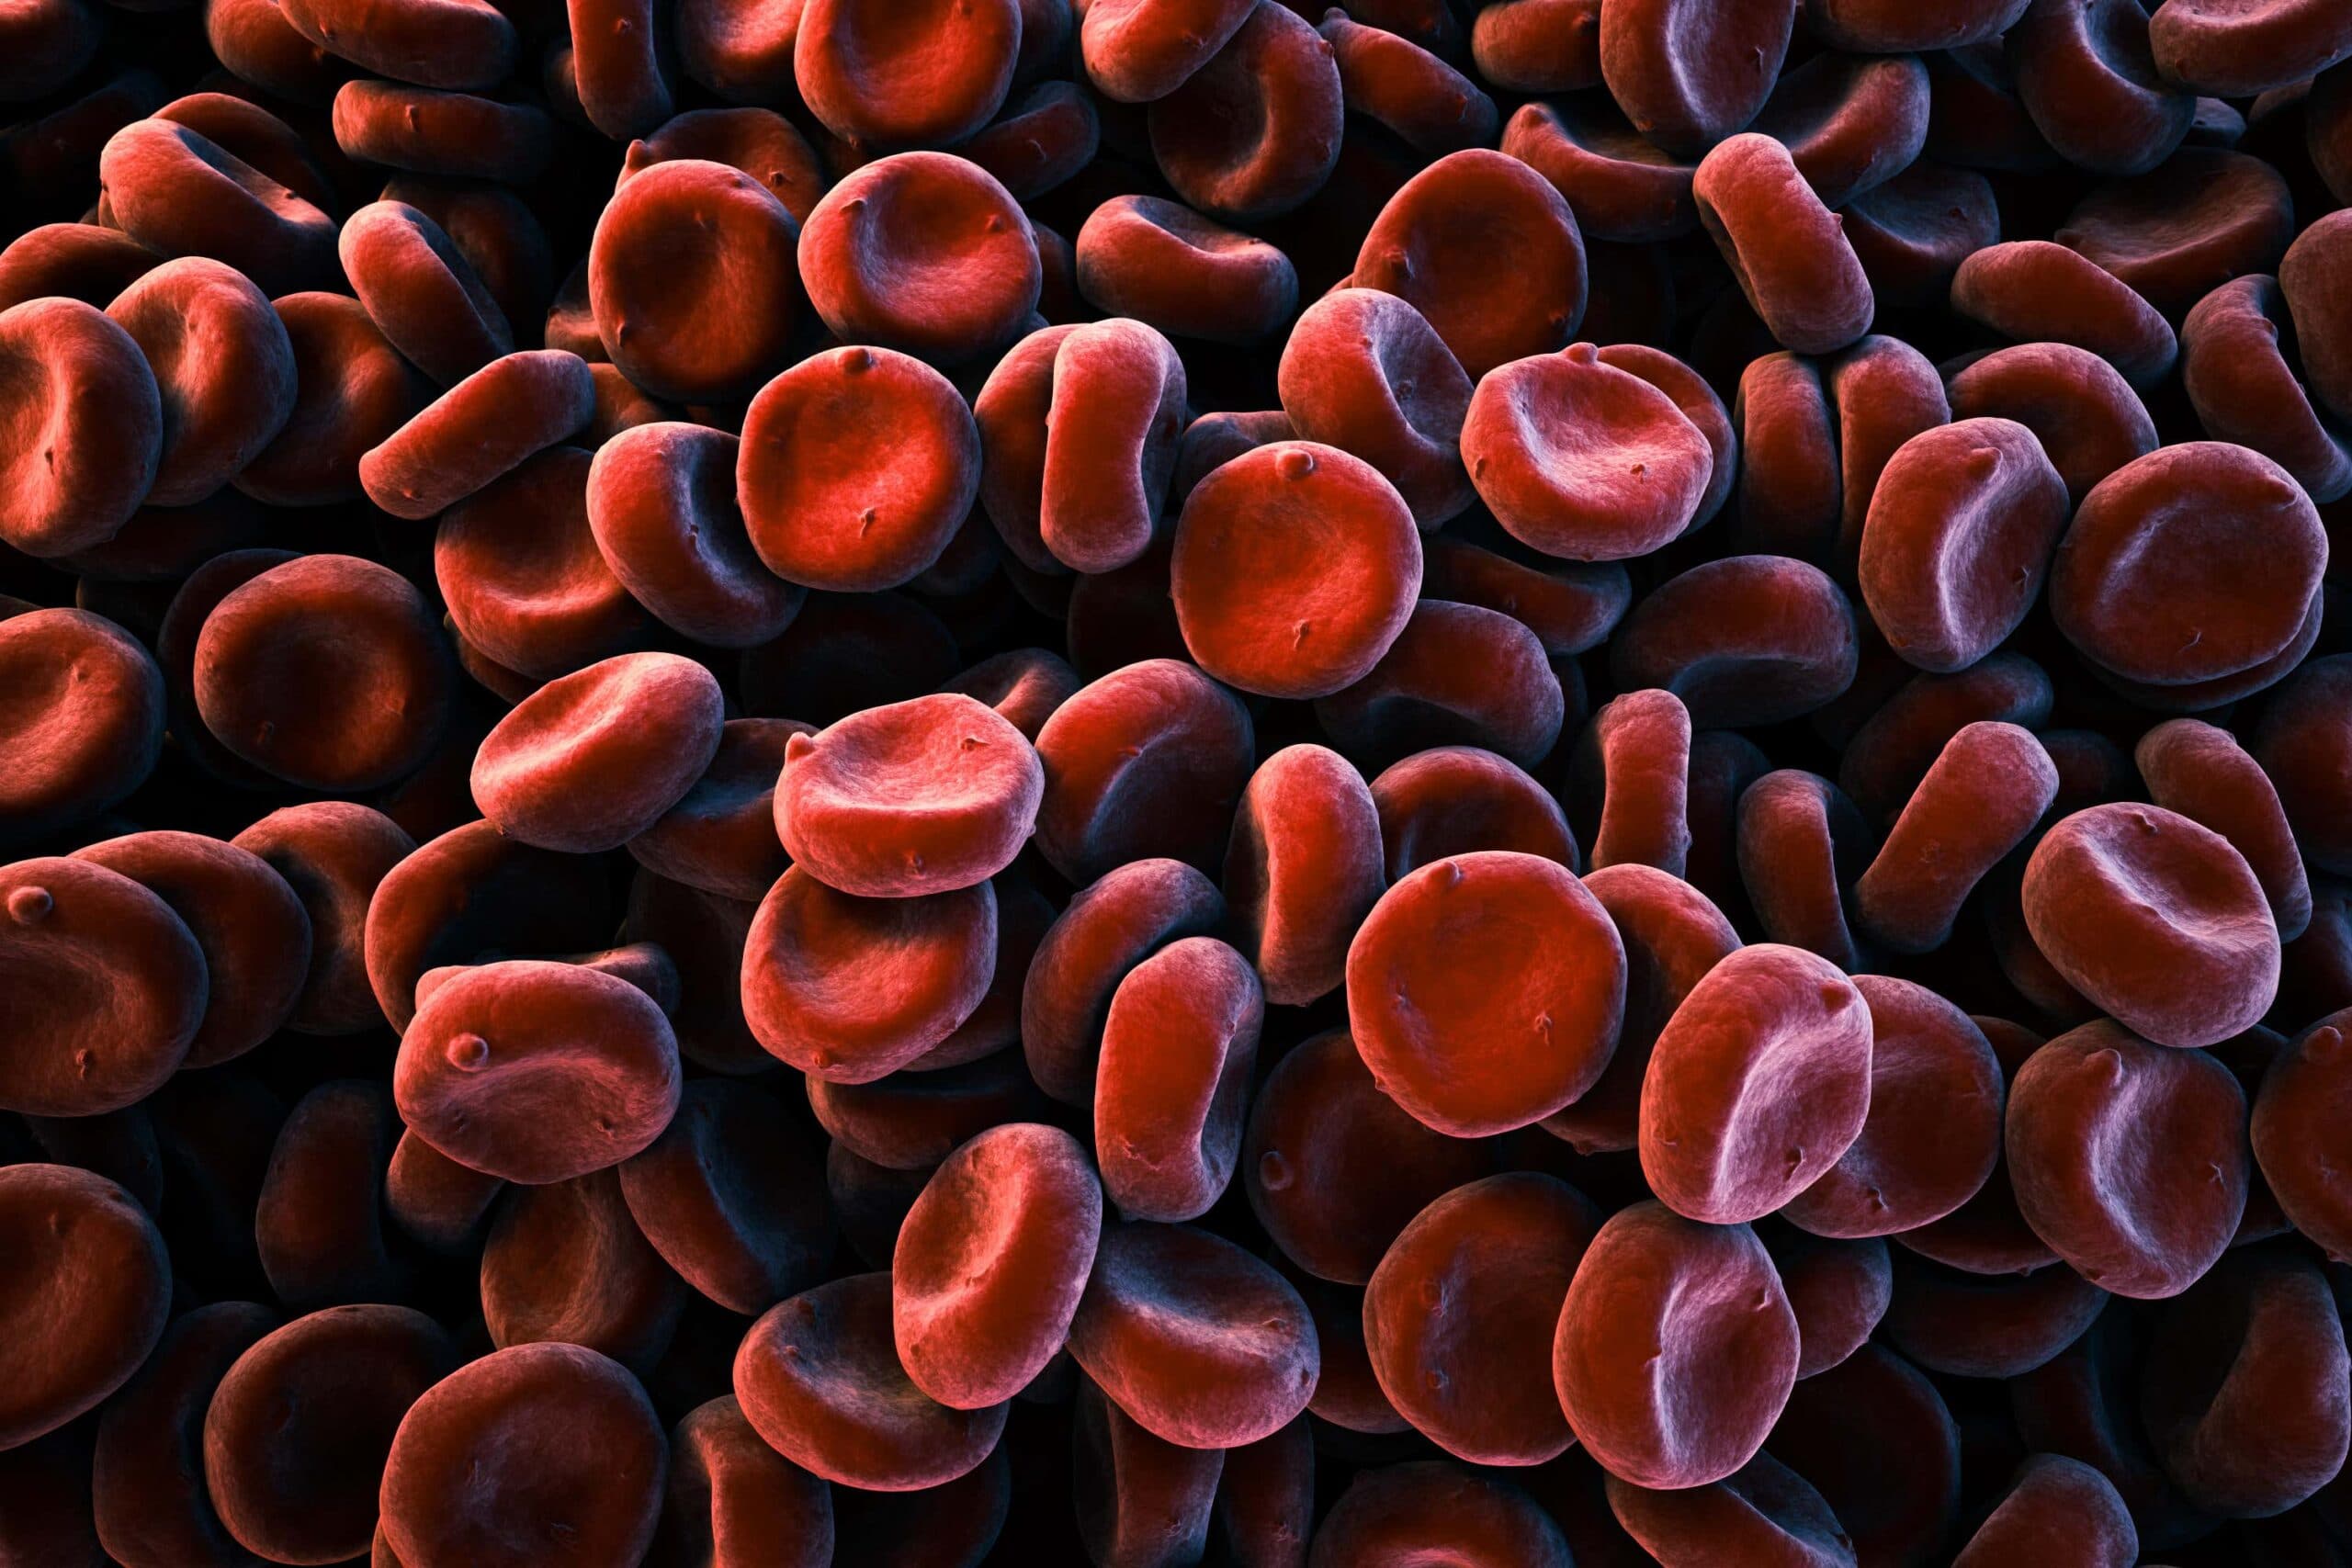 What causes blood clots